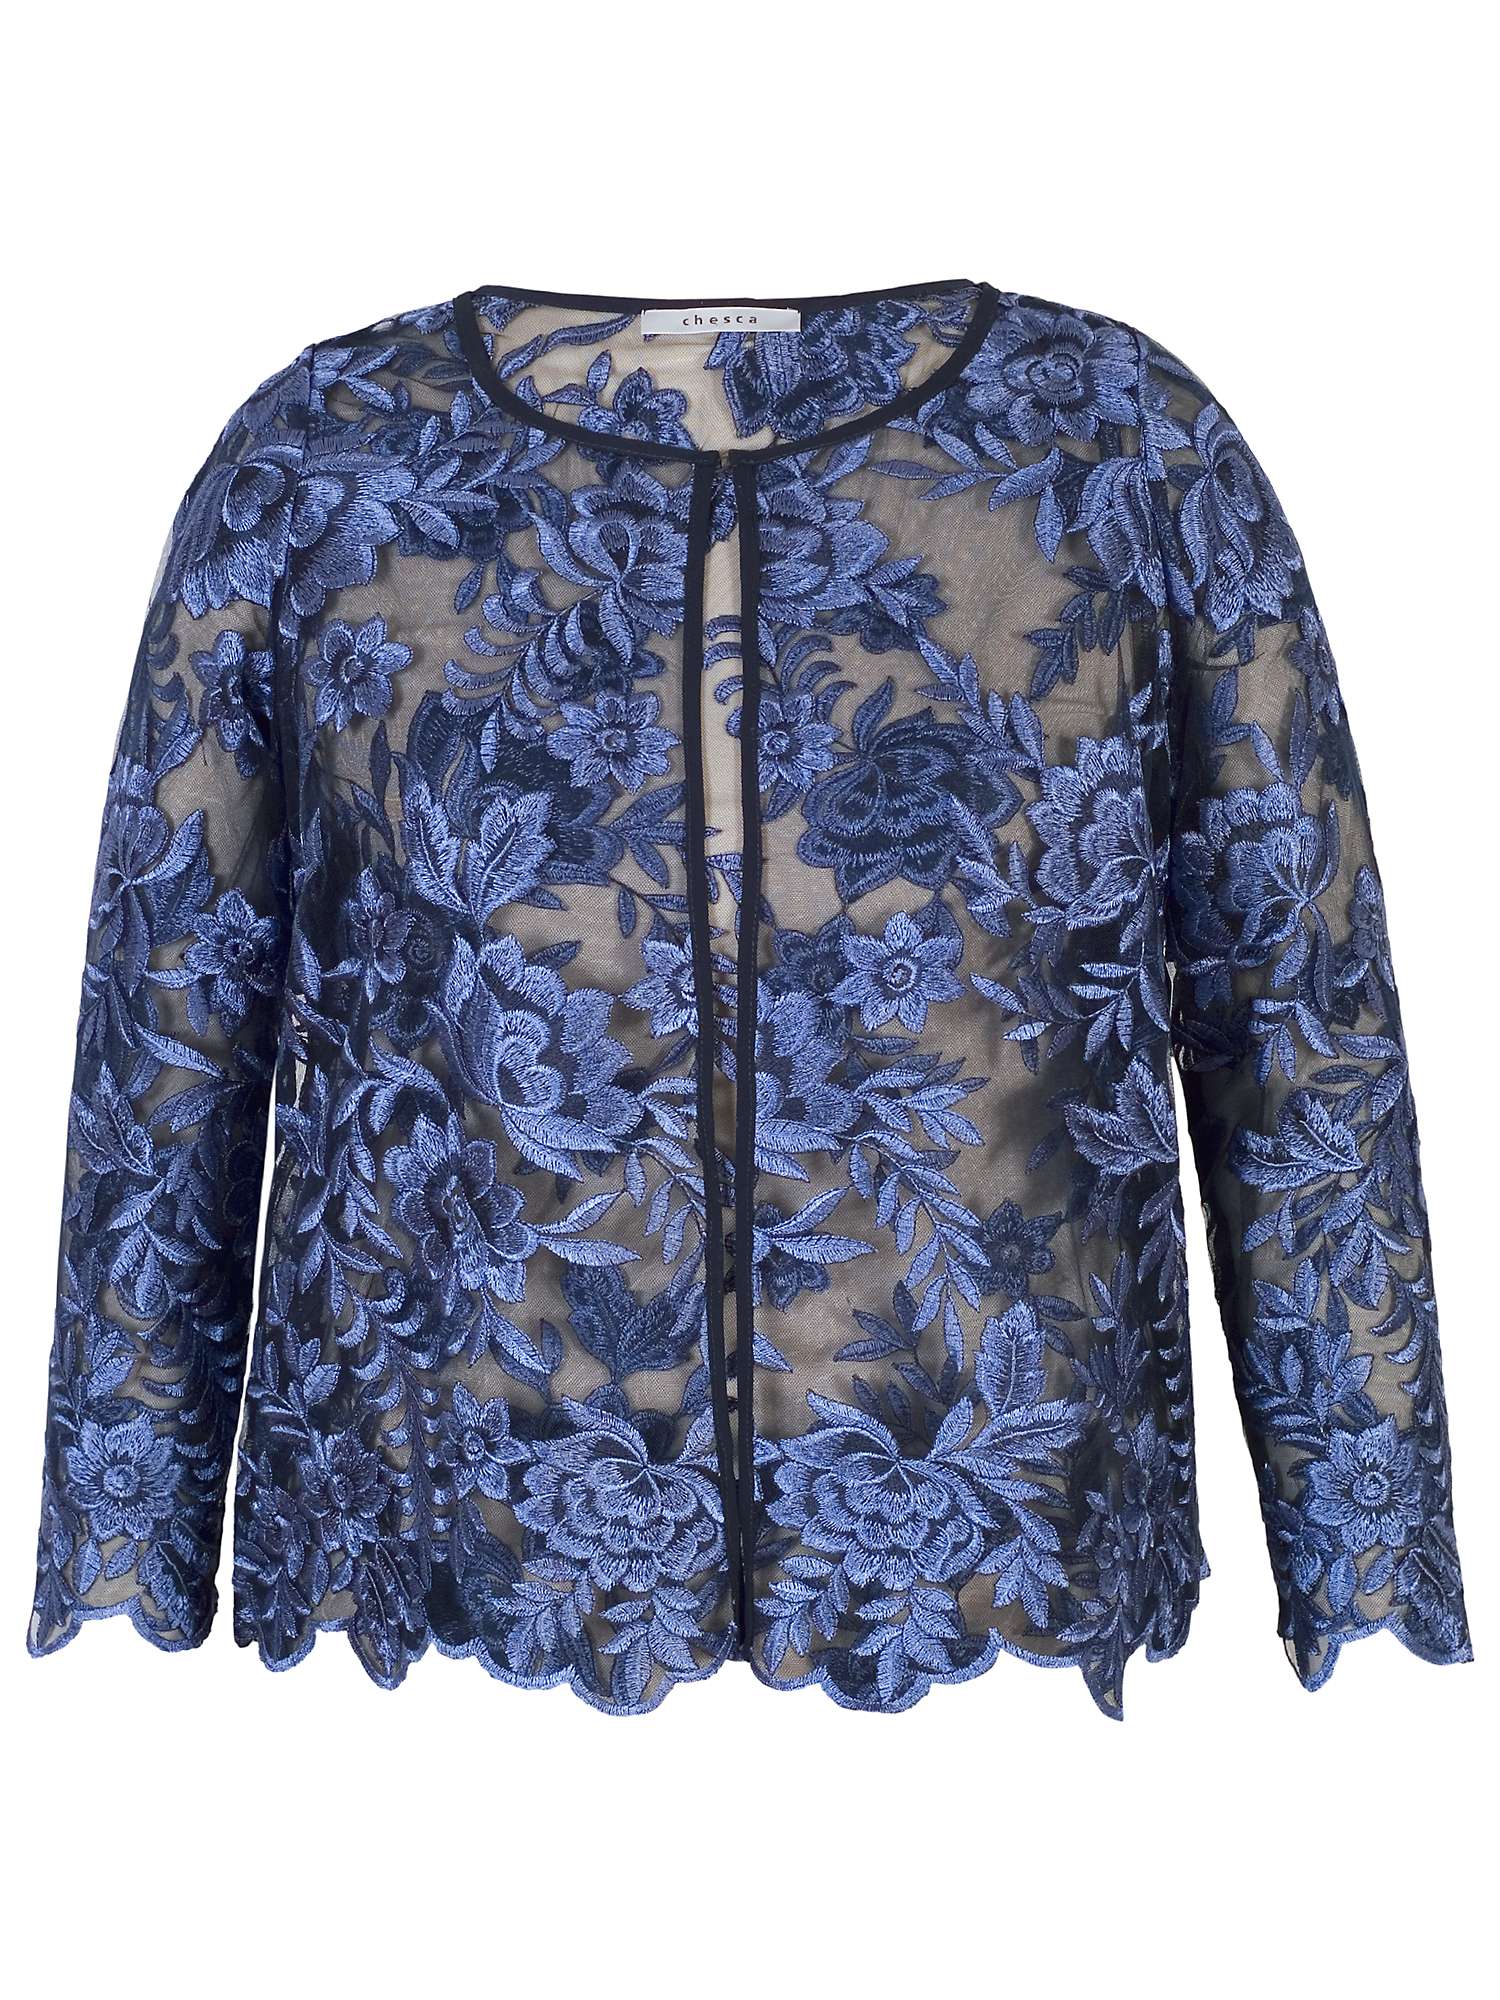 Buy Chesca Embroidered Mesh Jacket, Iris/Navy Online at johnlewis.com